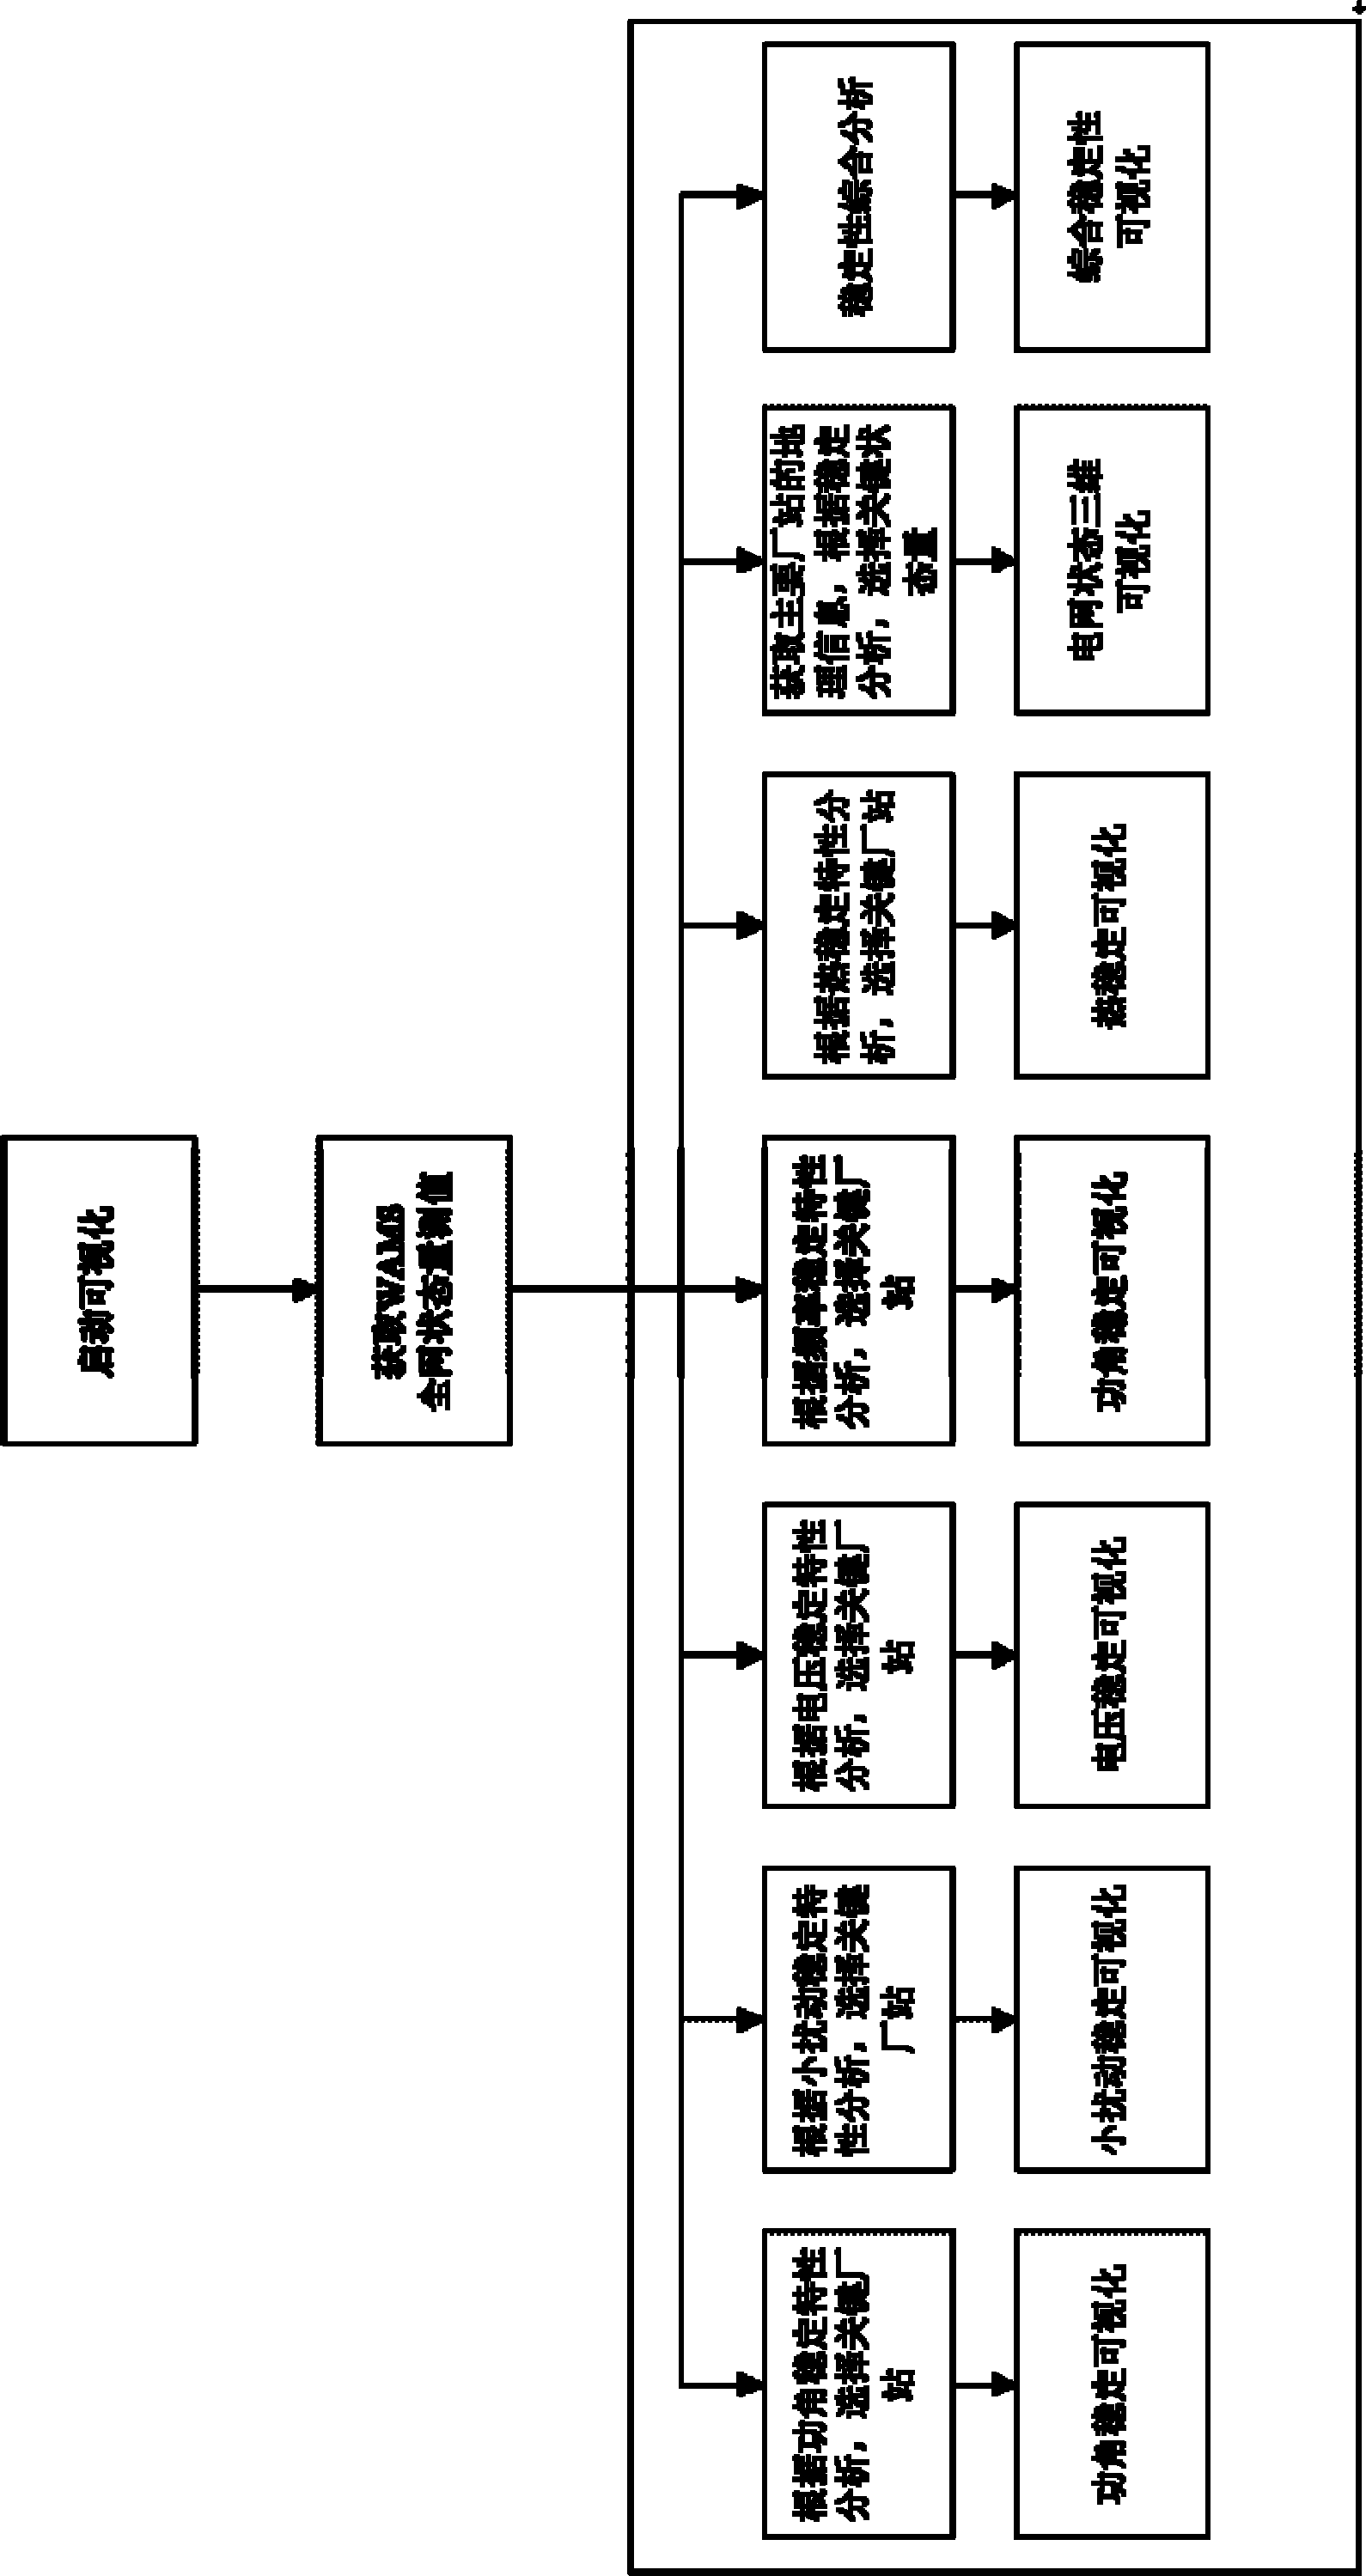 Wide-area-measurement-system (WAMS)-based power grid safety and stability visualization method